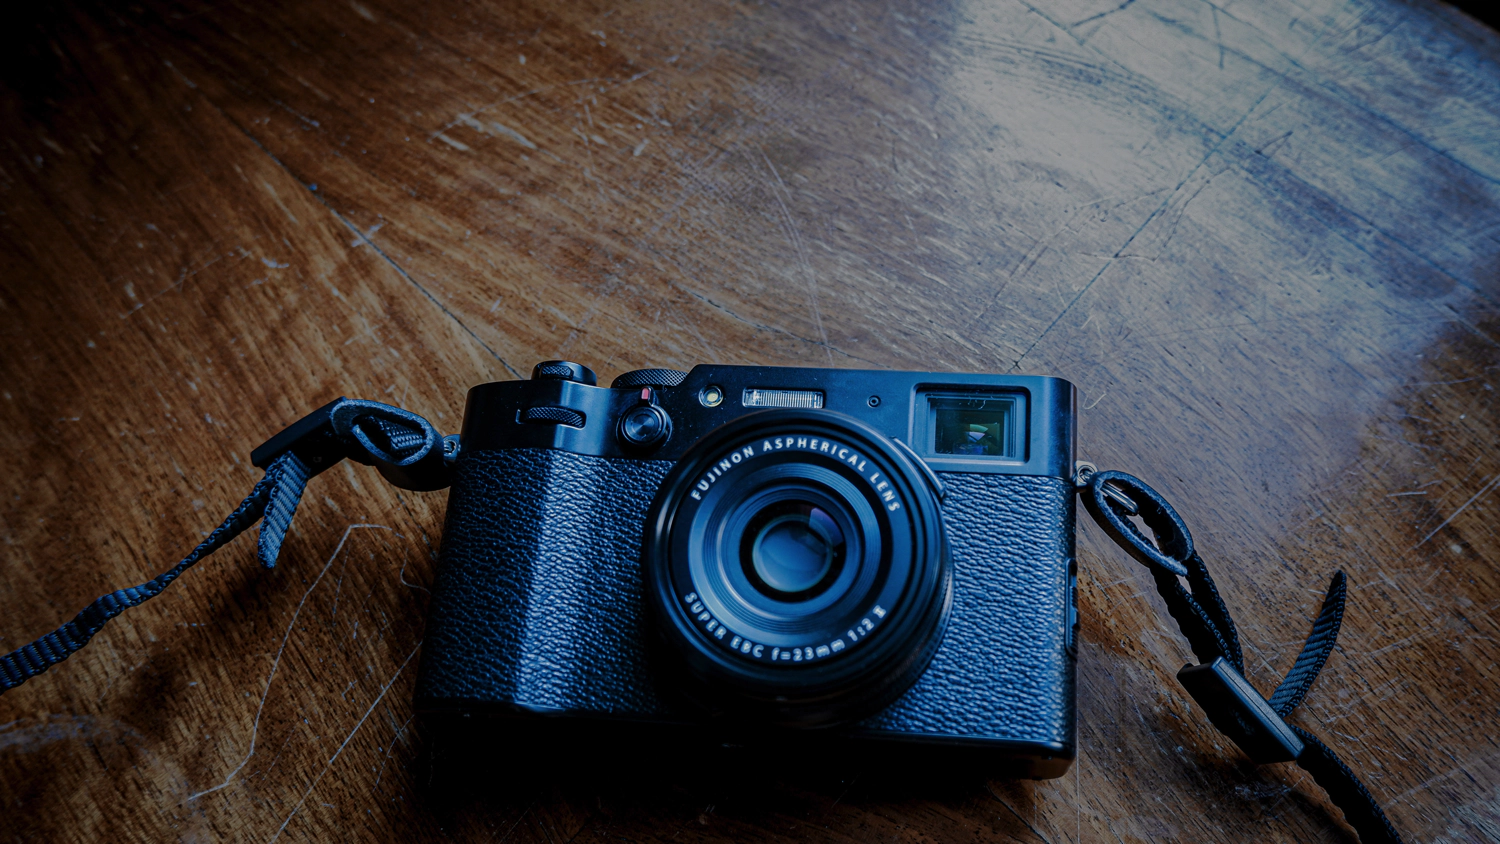 The FujiFilm X100V yet again. But this time from a different angle. Sorry.